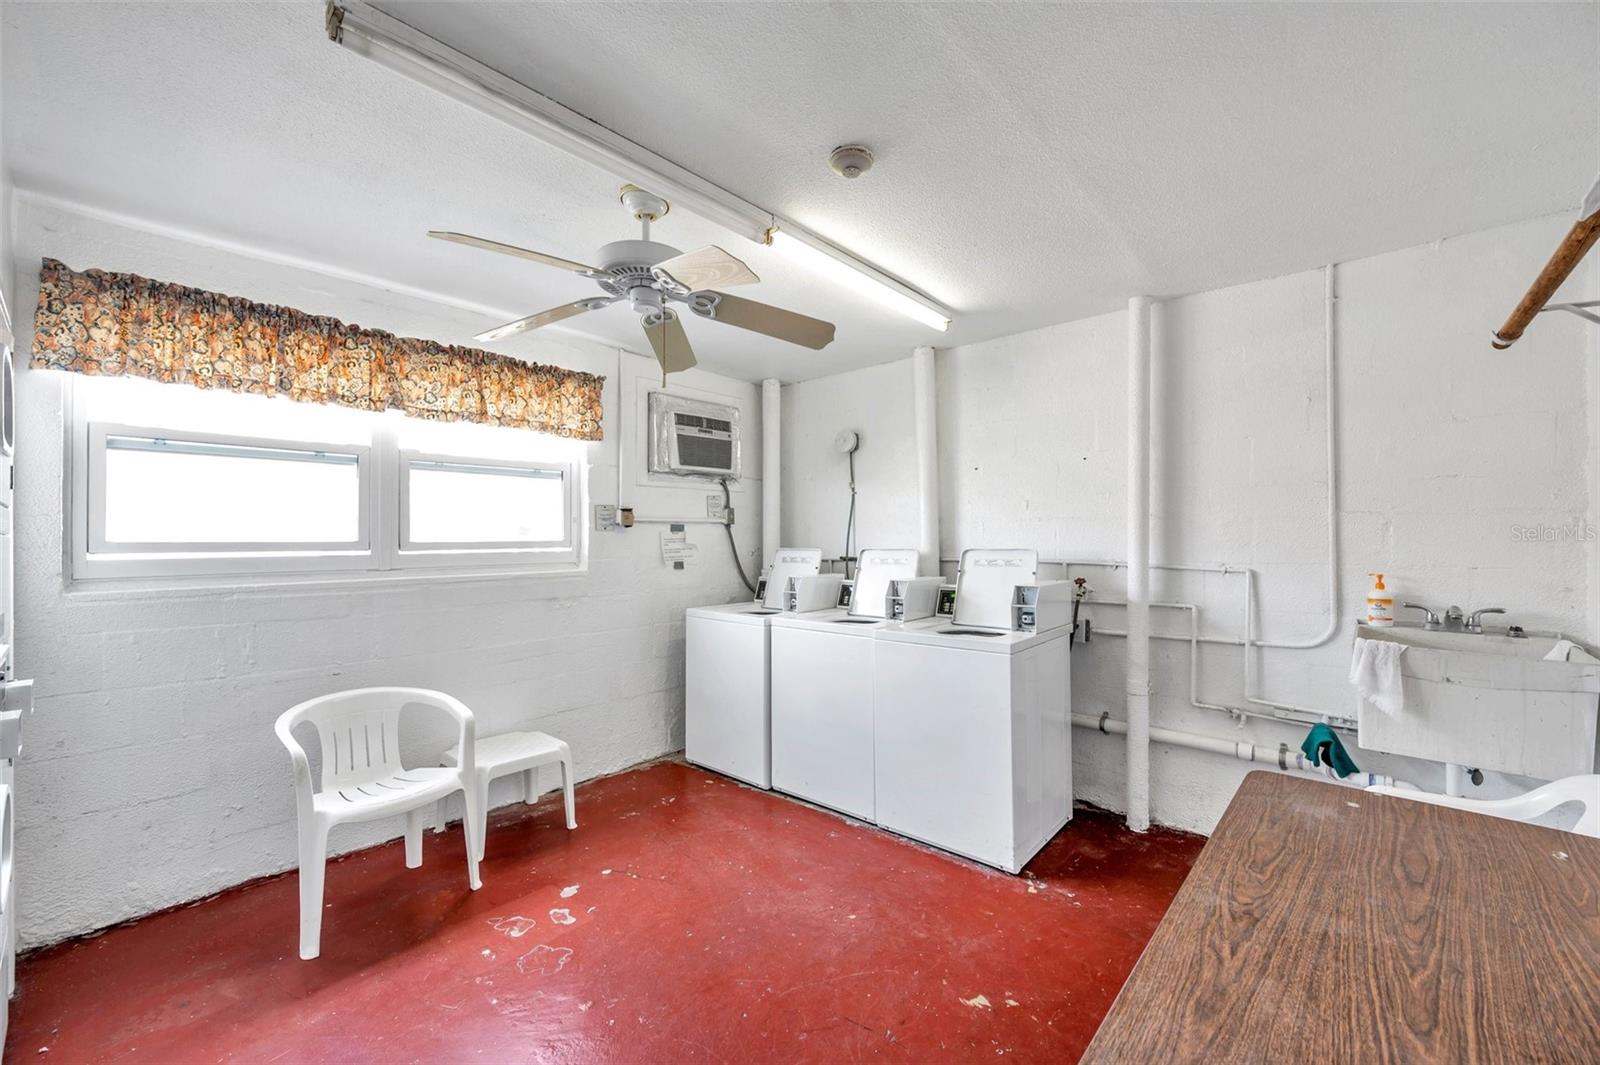 Laundry Room is on same level and is located just off the elevator/stairs and few units down from #404